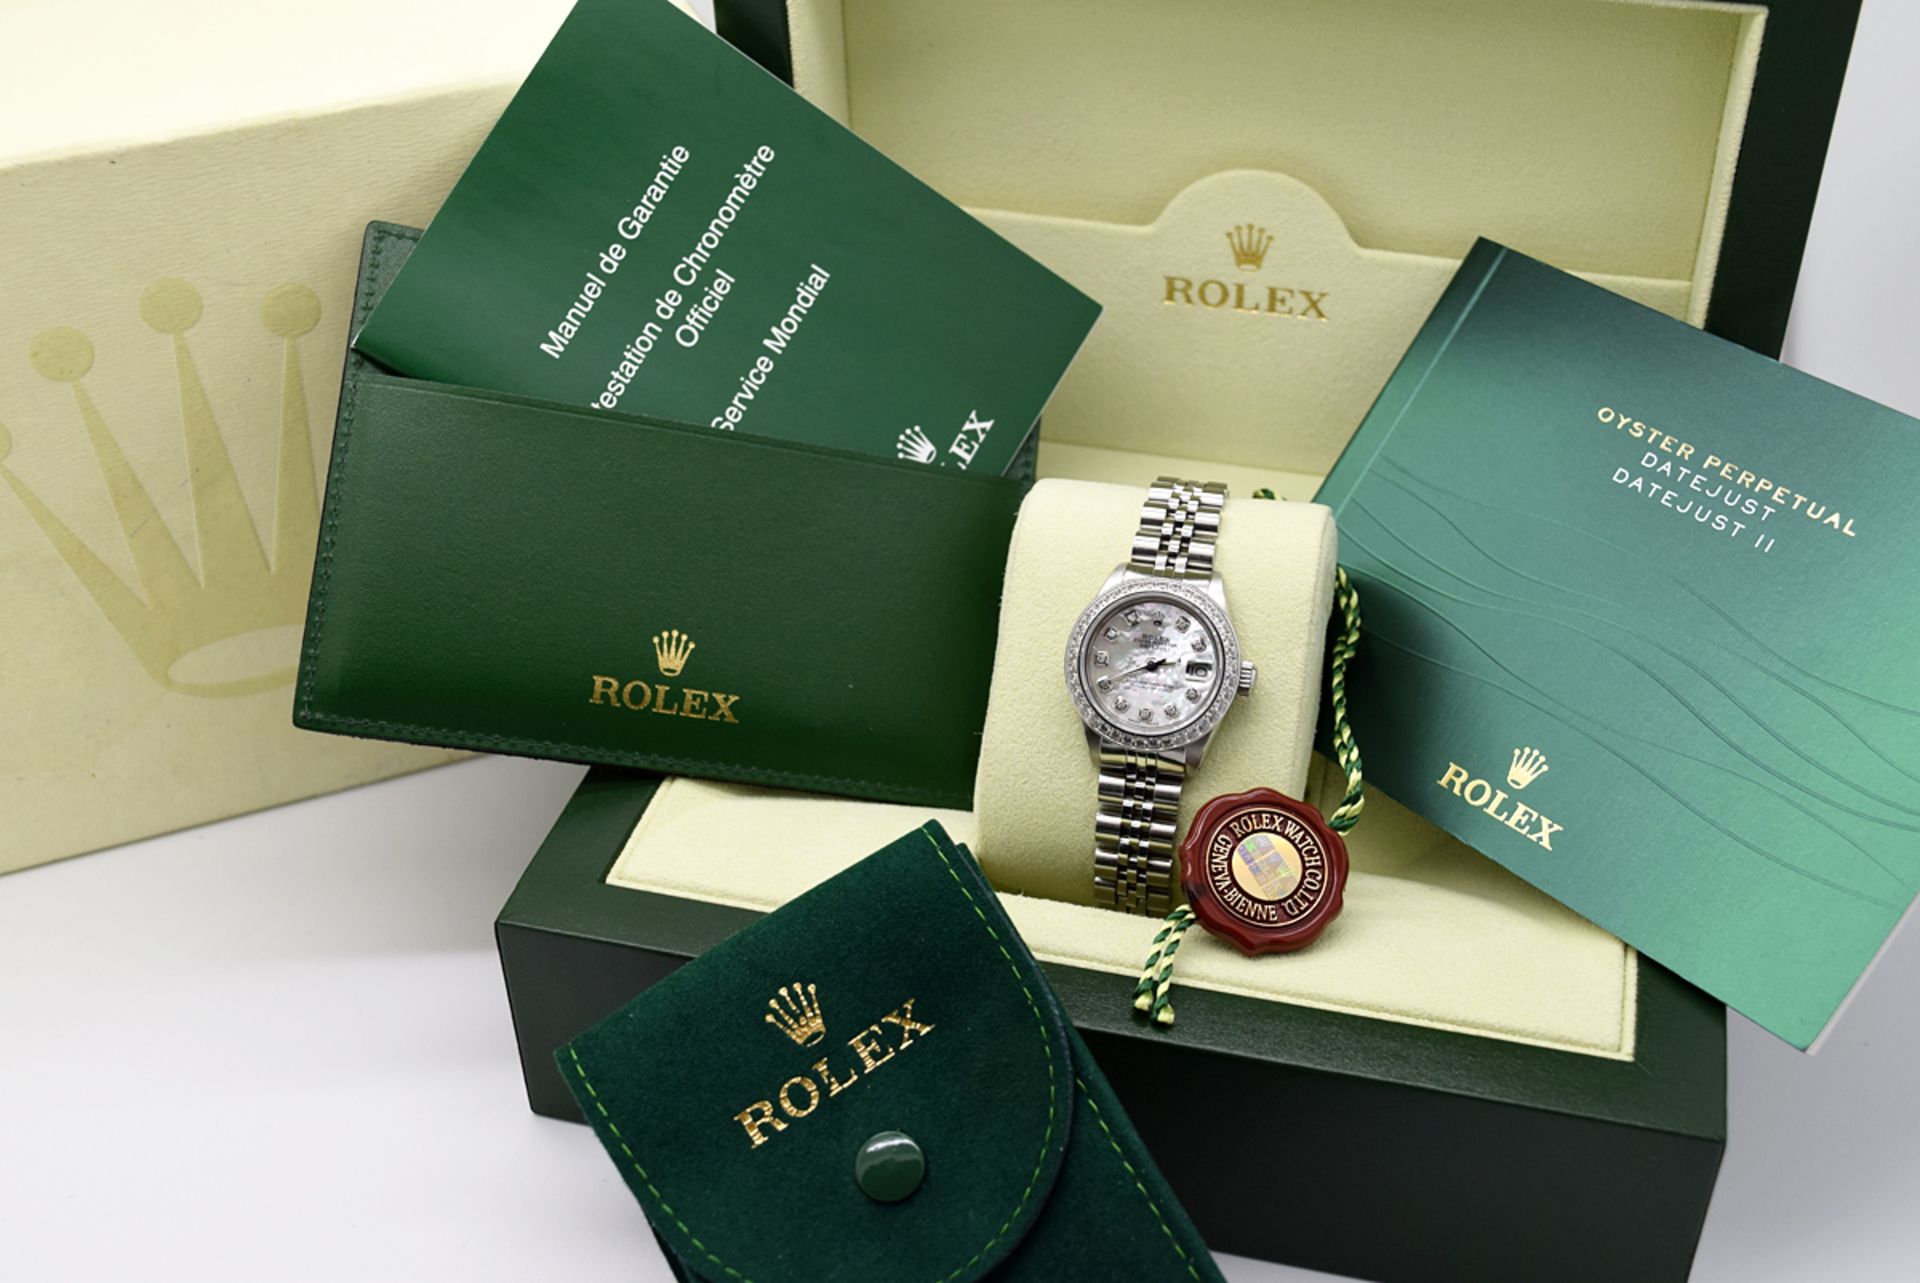 *STUNNING* ROLEX LADY DATEJUST - STAINLESS STEEL, DIAMOND MOP DIAL - Image 4 of 10